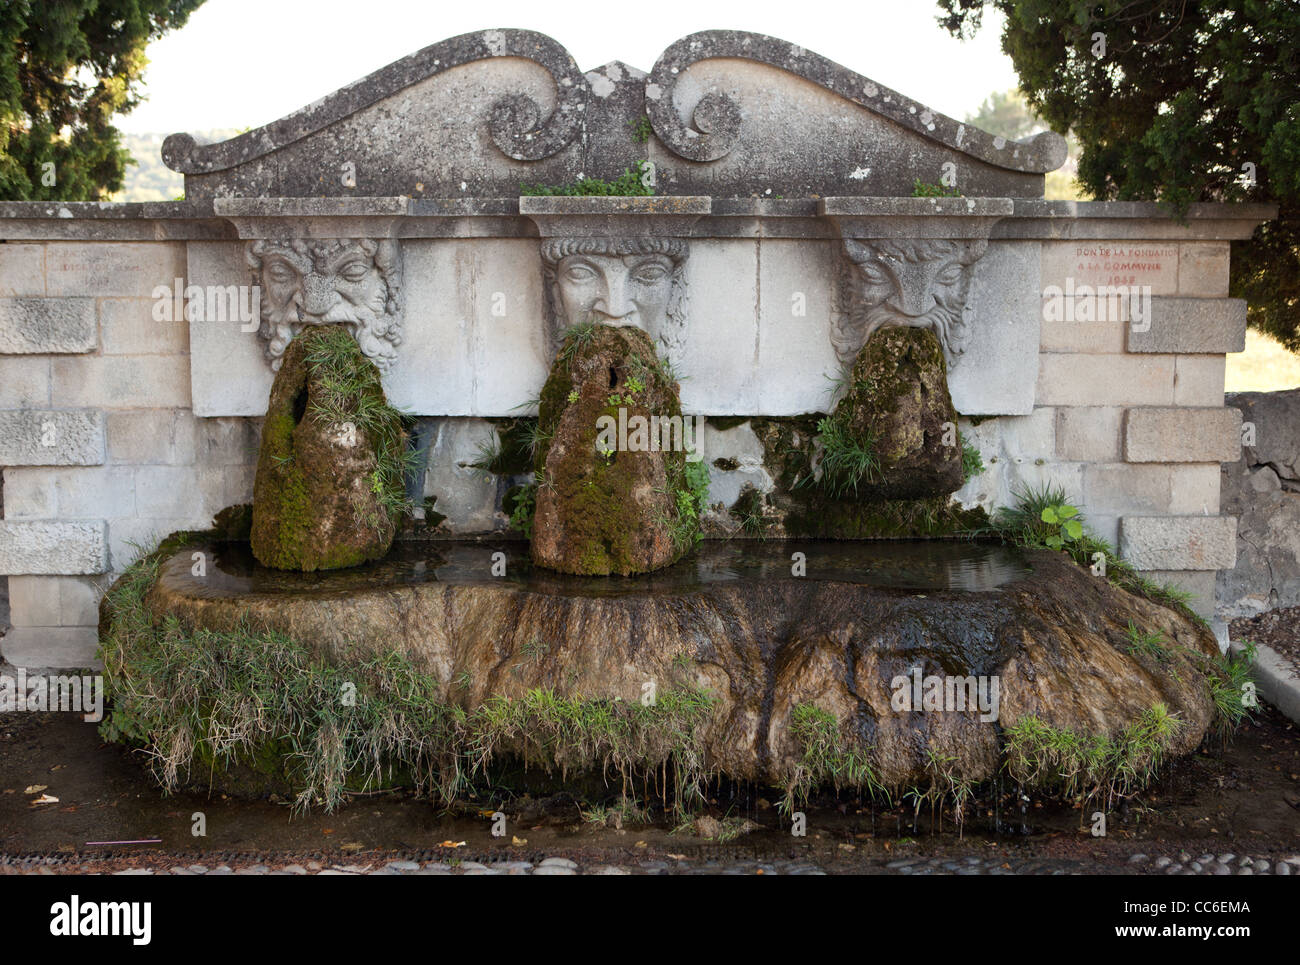 This interesting fountain / sculpture has three faces with moss coming out of their mouths - in Lourmarin, France Stock Photo